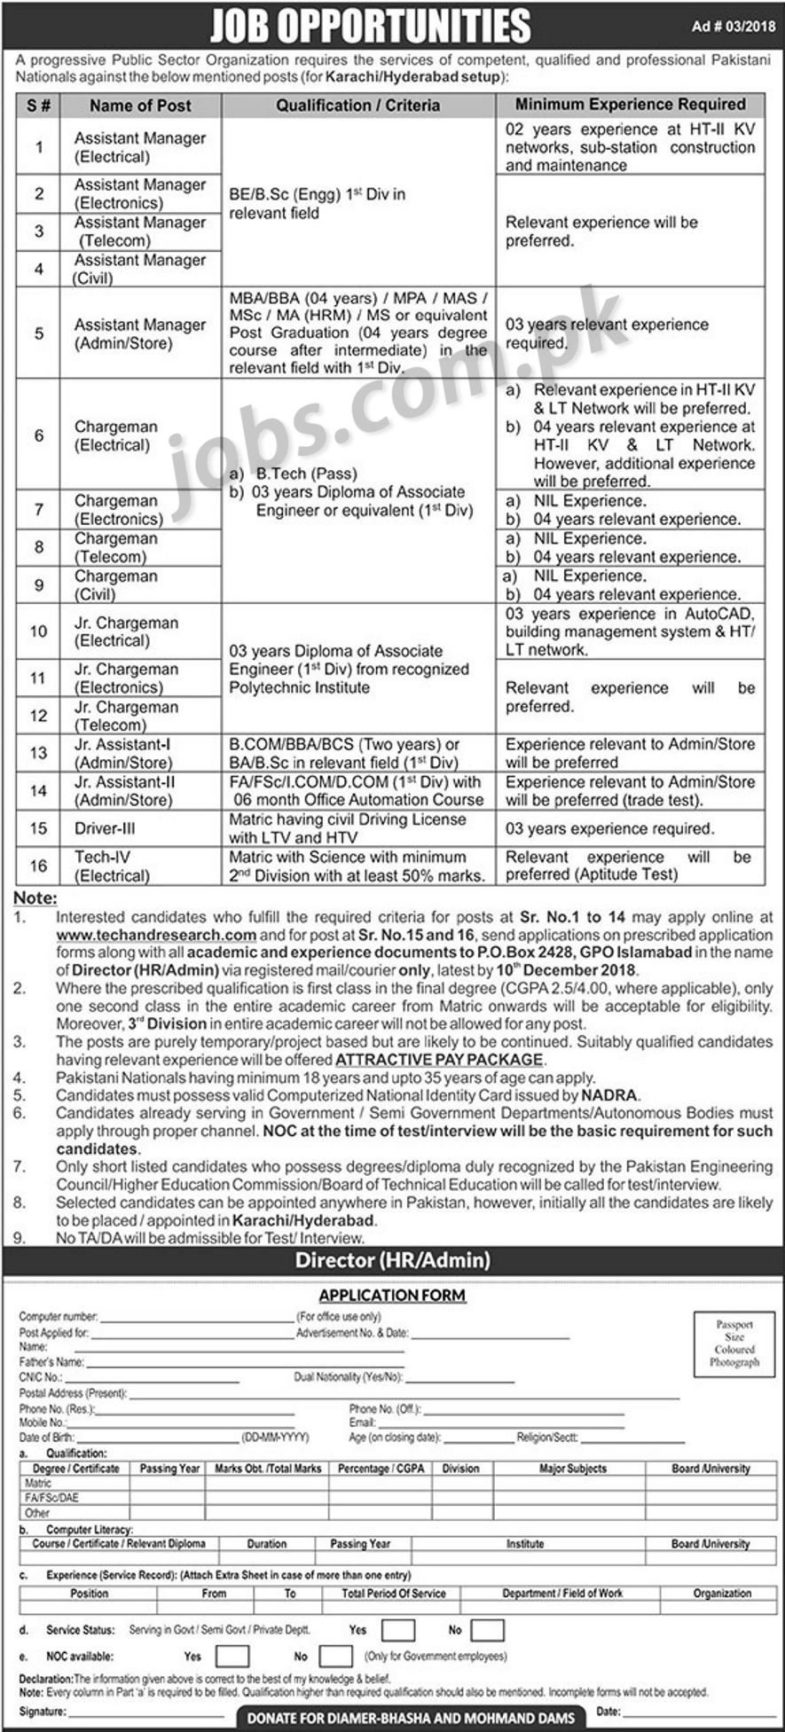 PO Box 2428 Federal Govt Organization Jobs 2019 For Jr Assistant-I/II, Admin, Engineering, Chargeman, DAE, Tech-IV And Drivers PO Box 2428 Jobs 2019: The Federal Govt Organization is inviting applications from eligible candidates for Jr Assistant-I/II, Admin, Engineering, Chargeman, DAE, Tech-IV and Drivers. Required qualification from a recognized institution, relevant work experience and age limit requirement are as following. Eligible candidates are encouraged to apply to the post in prescribed manner. Incomplete, late, hand written submissions/applications will not be entertained. Only shortlisted candidates will be called for written test/interview. See the notification below to see vacancies/positions available, eligibility criteria and other requirements. Eligible candidates must submit applications on or before 10th December 2018.